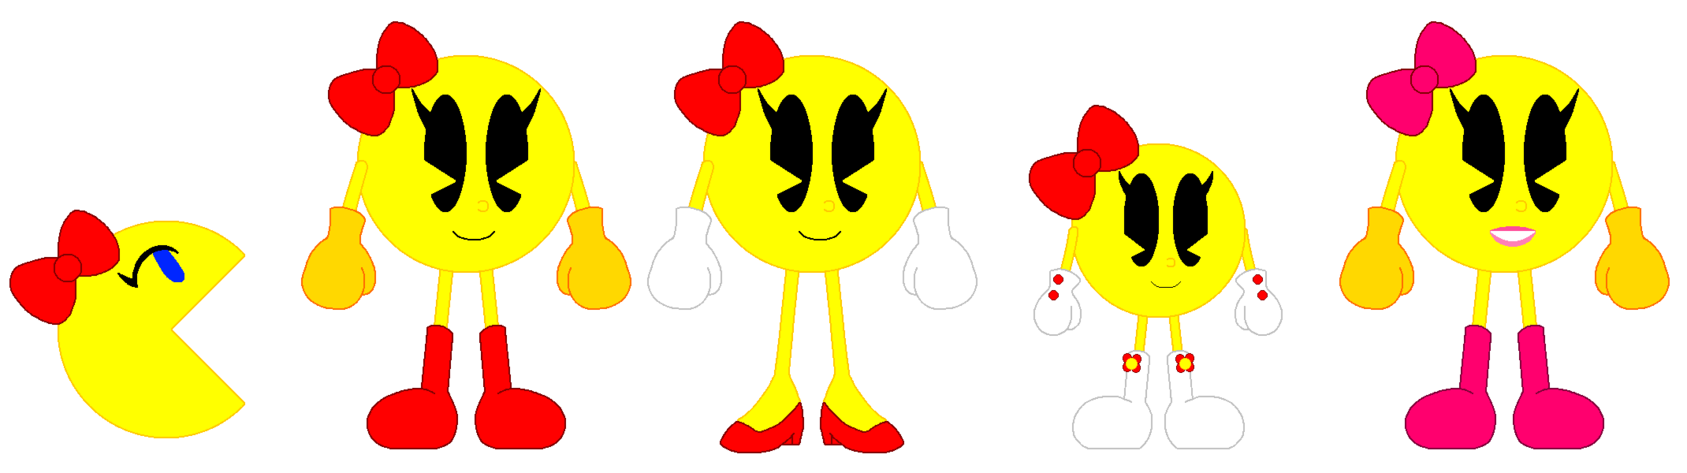 Pacman clipart line. Ms pac man variations